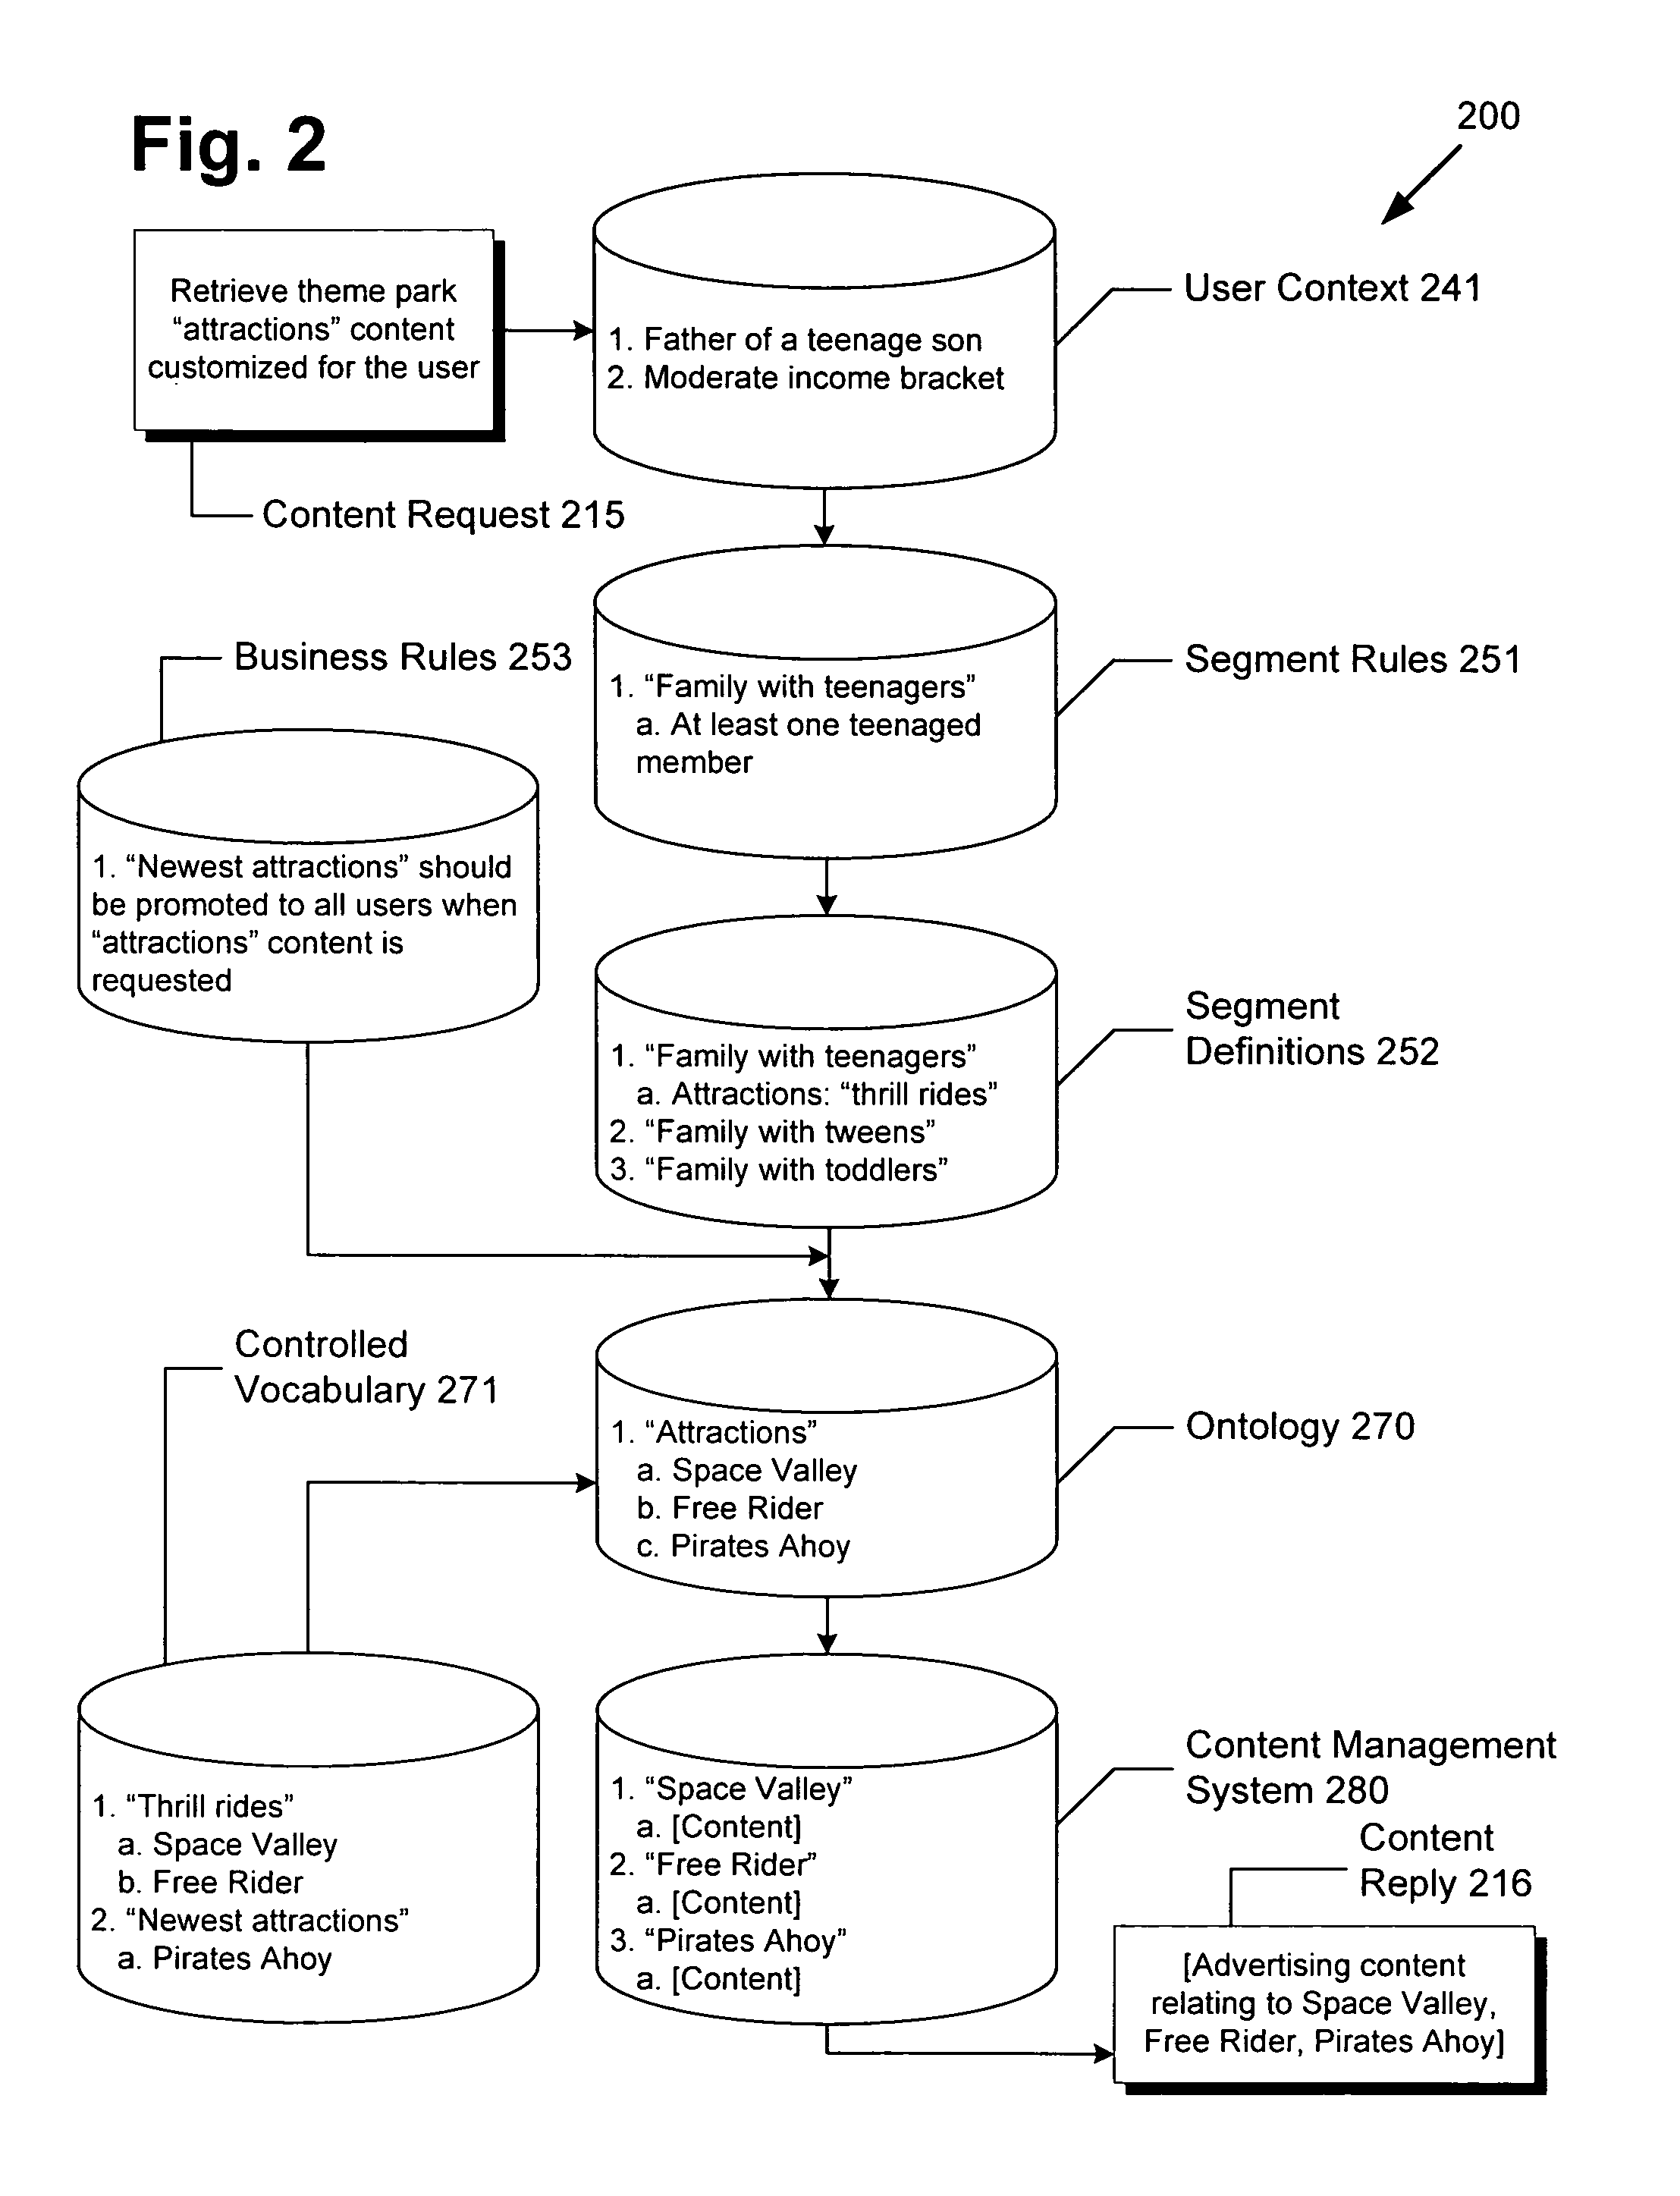 System and method for ontology and rules based segmentation engine for networked content delivery